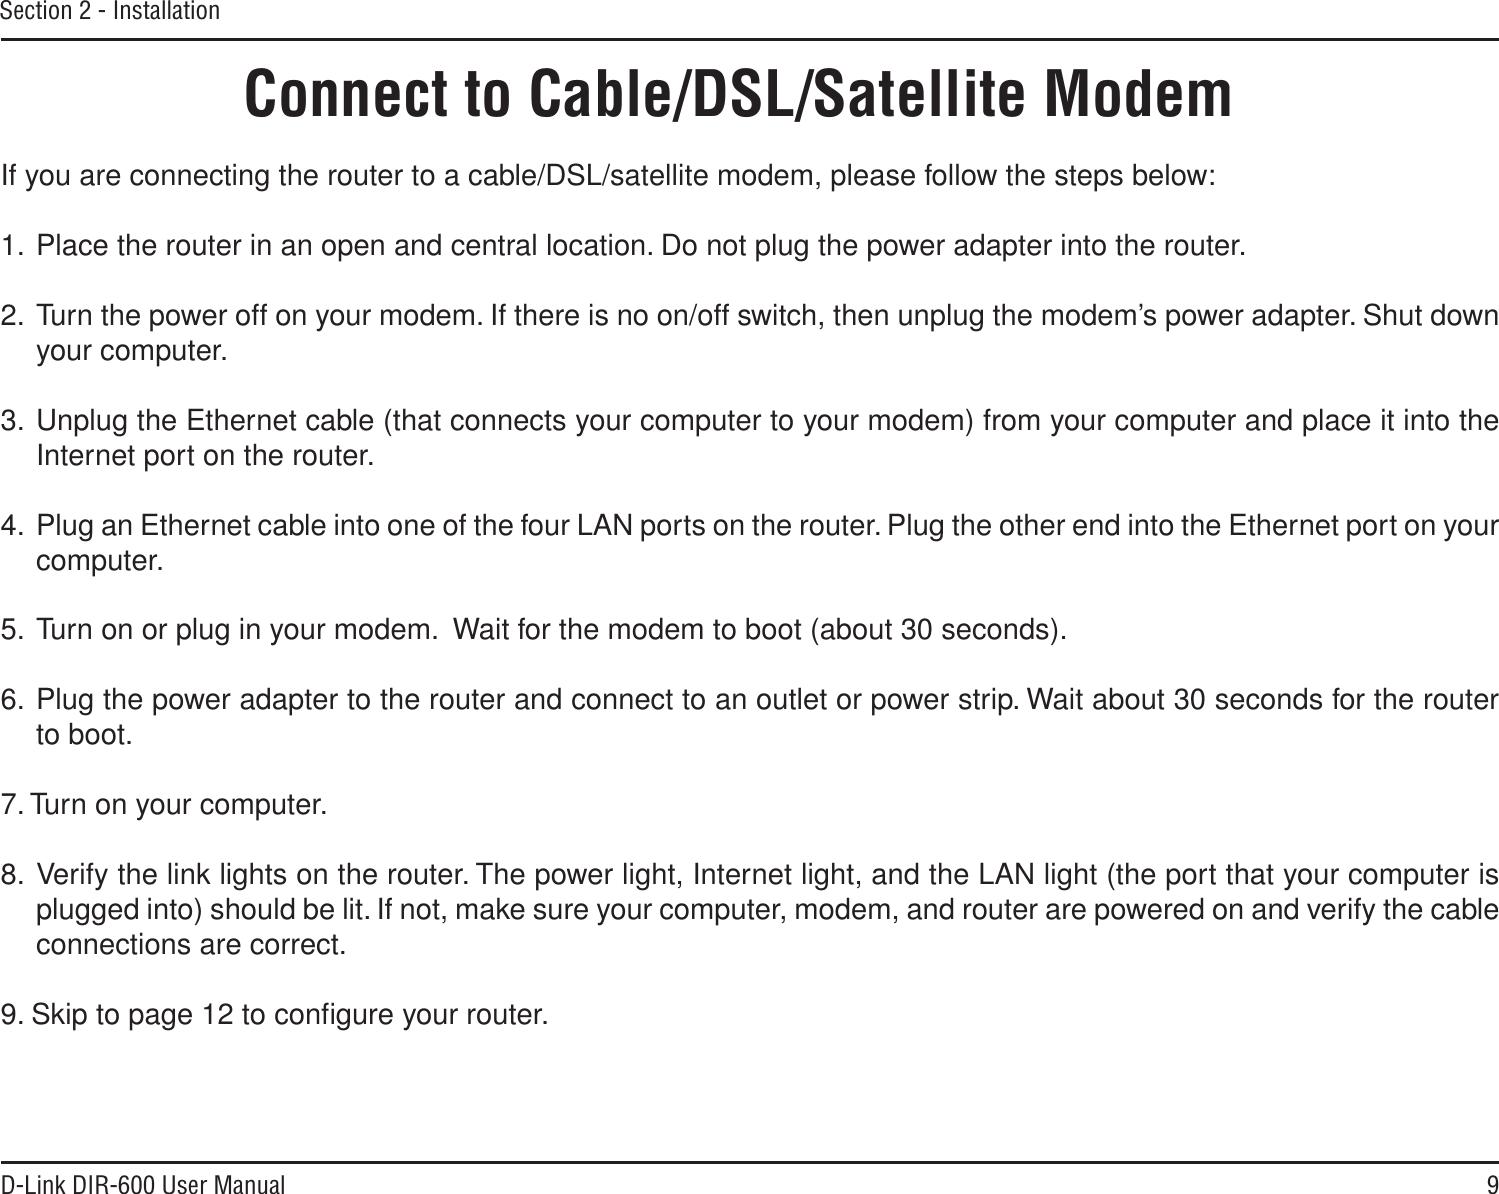 9D-Link DIR-600 User ManualSection 2 - InstallationIf you are connecting the router to a cable/DSL/satellite modem, please follow the steps below:1. Place the router in an open and central location. Do not plug the power adapter into the router. 2. Turn the power off on your modem. If there is no on/off switch, then unplug the modem’s power adapter. Shut down your computer.3. Unplug the Ethernet cable (that connects your computer to your modem) from your computer and place it into the Internet port on the router.  4. Plug an Ethernet cable into one of the four LAN ports on the router. Plug the other end into the Ethernet port on your computer.5. Turn on or plug in your modem.  Wait for the modem to boot (about 30 seconds). 6. Plug the power adapter to the router and connect to an outlet or power strip. Wait about 30 seconds for the router to boot. 7. Turn on your computer. 8. Verify the link lights on the router. The power light, Internet light, and the LAN light (the port that your computer is plugged into) should be lit. If not, make sure your computer, modem, and router are powered on and verify the cable connections are correct. 9. Skip to page 12 to conﬁgure your router. Connect to Cable/DSL/Satellite Modem